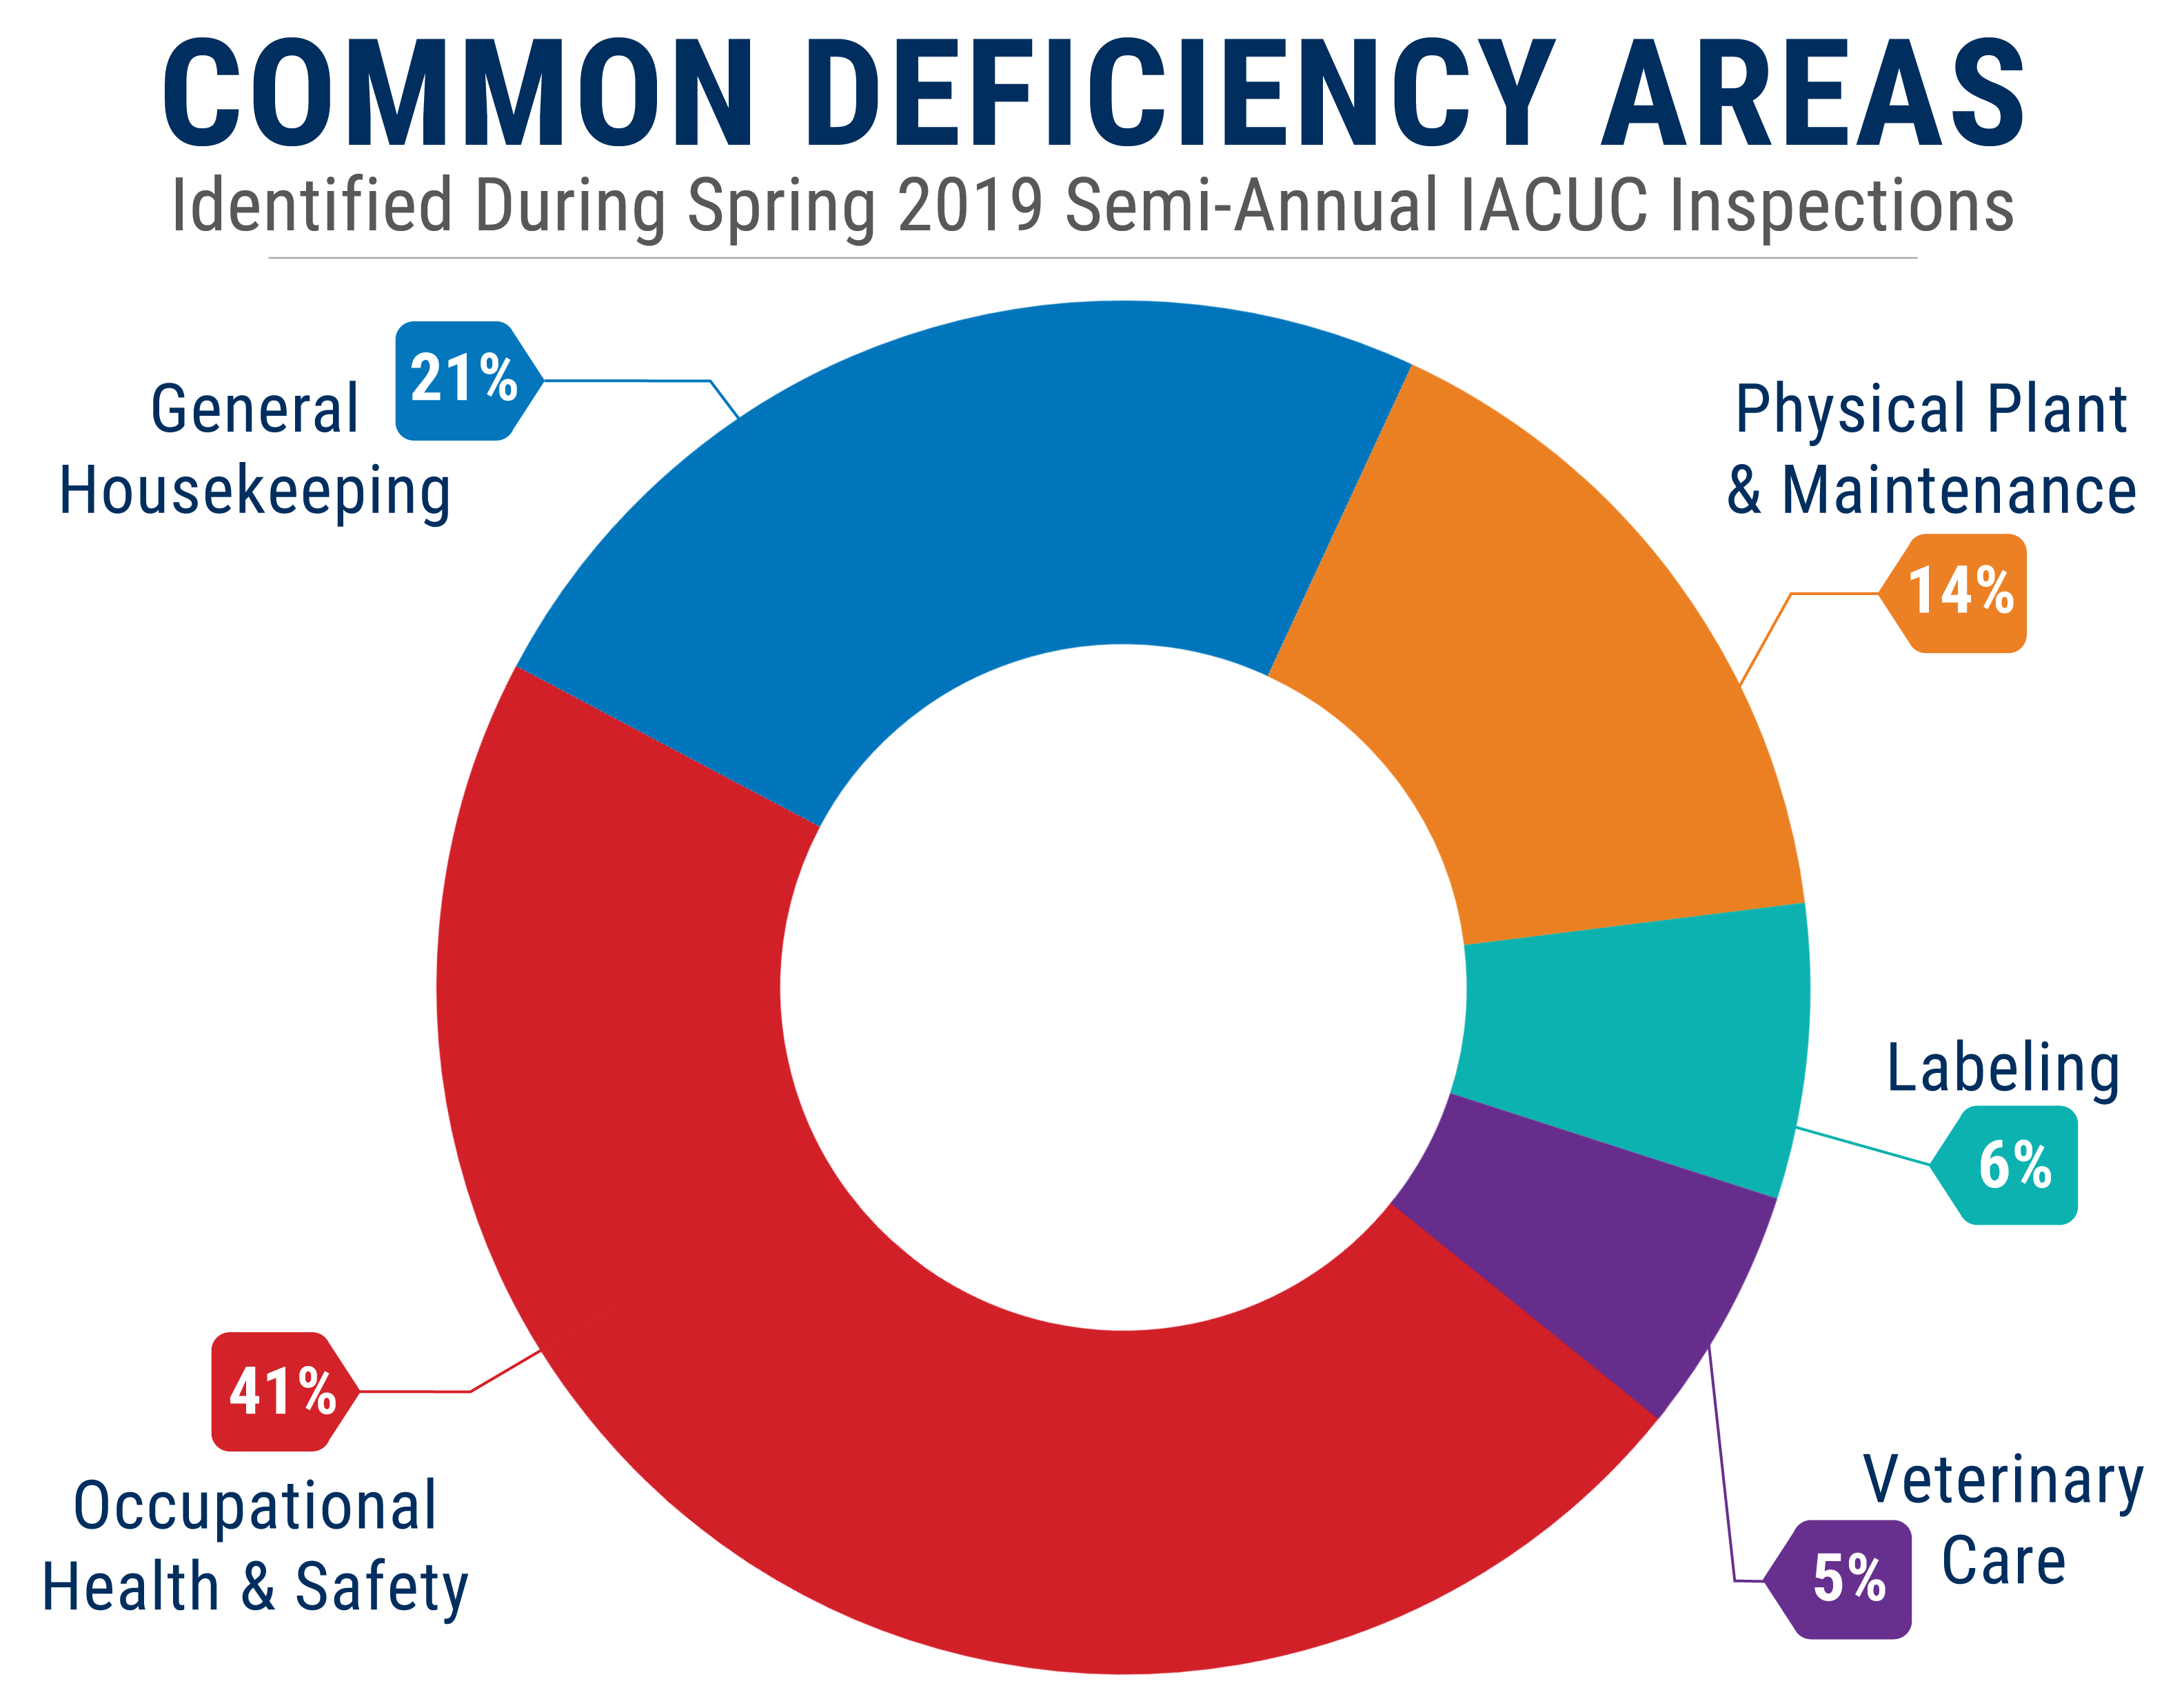 Donut chart outlining common deficiency areas found during Spring 2019 semi-annual IACUC facility inspections